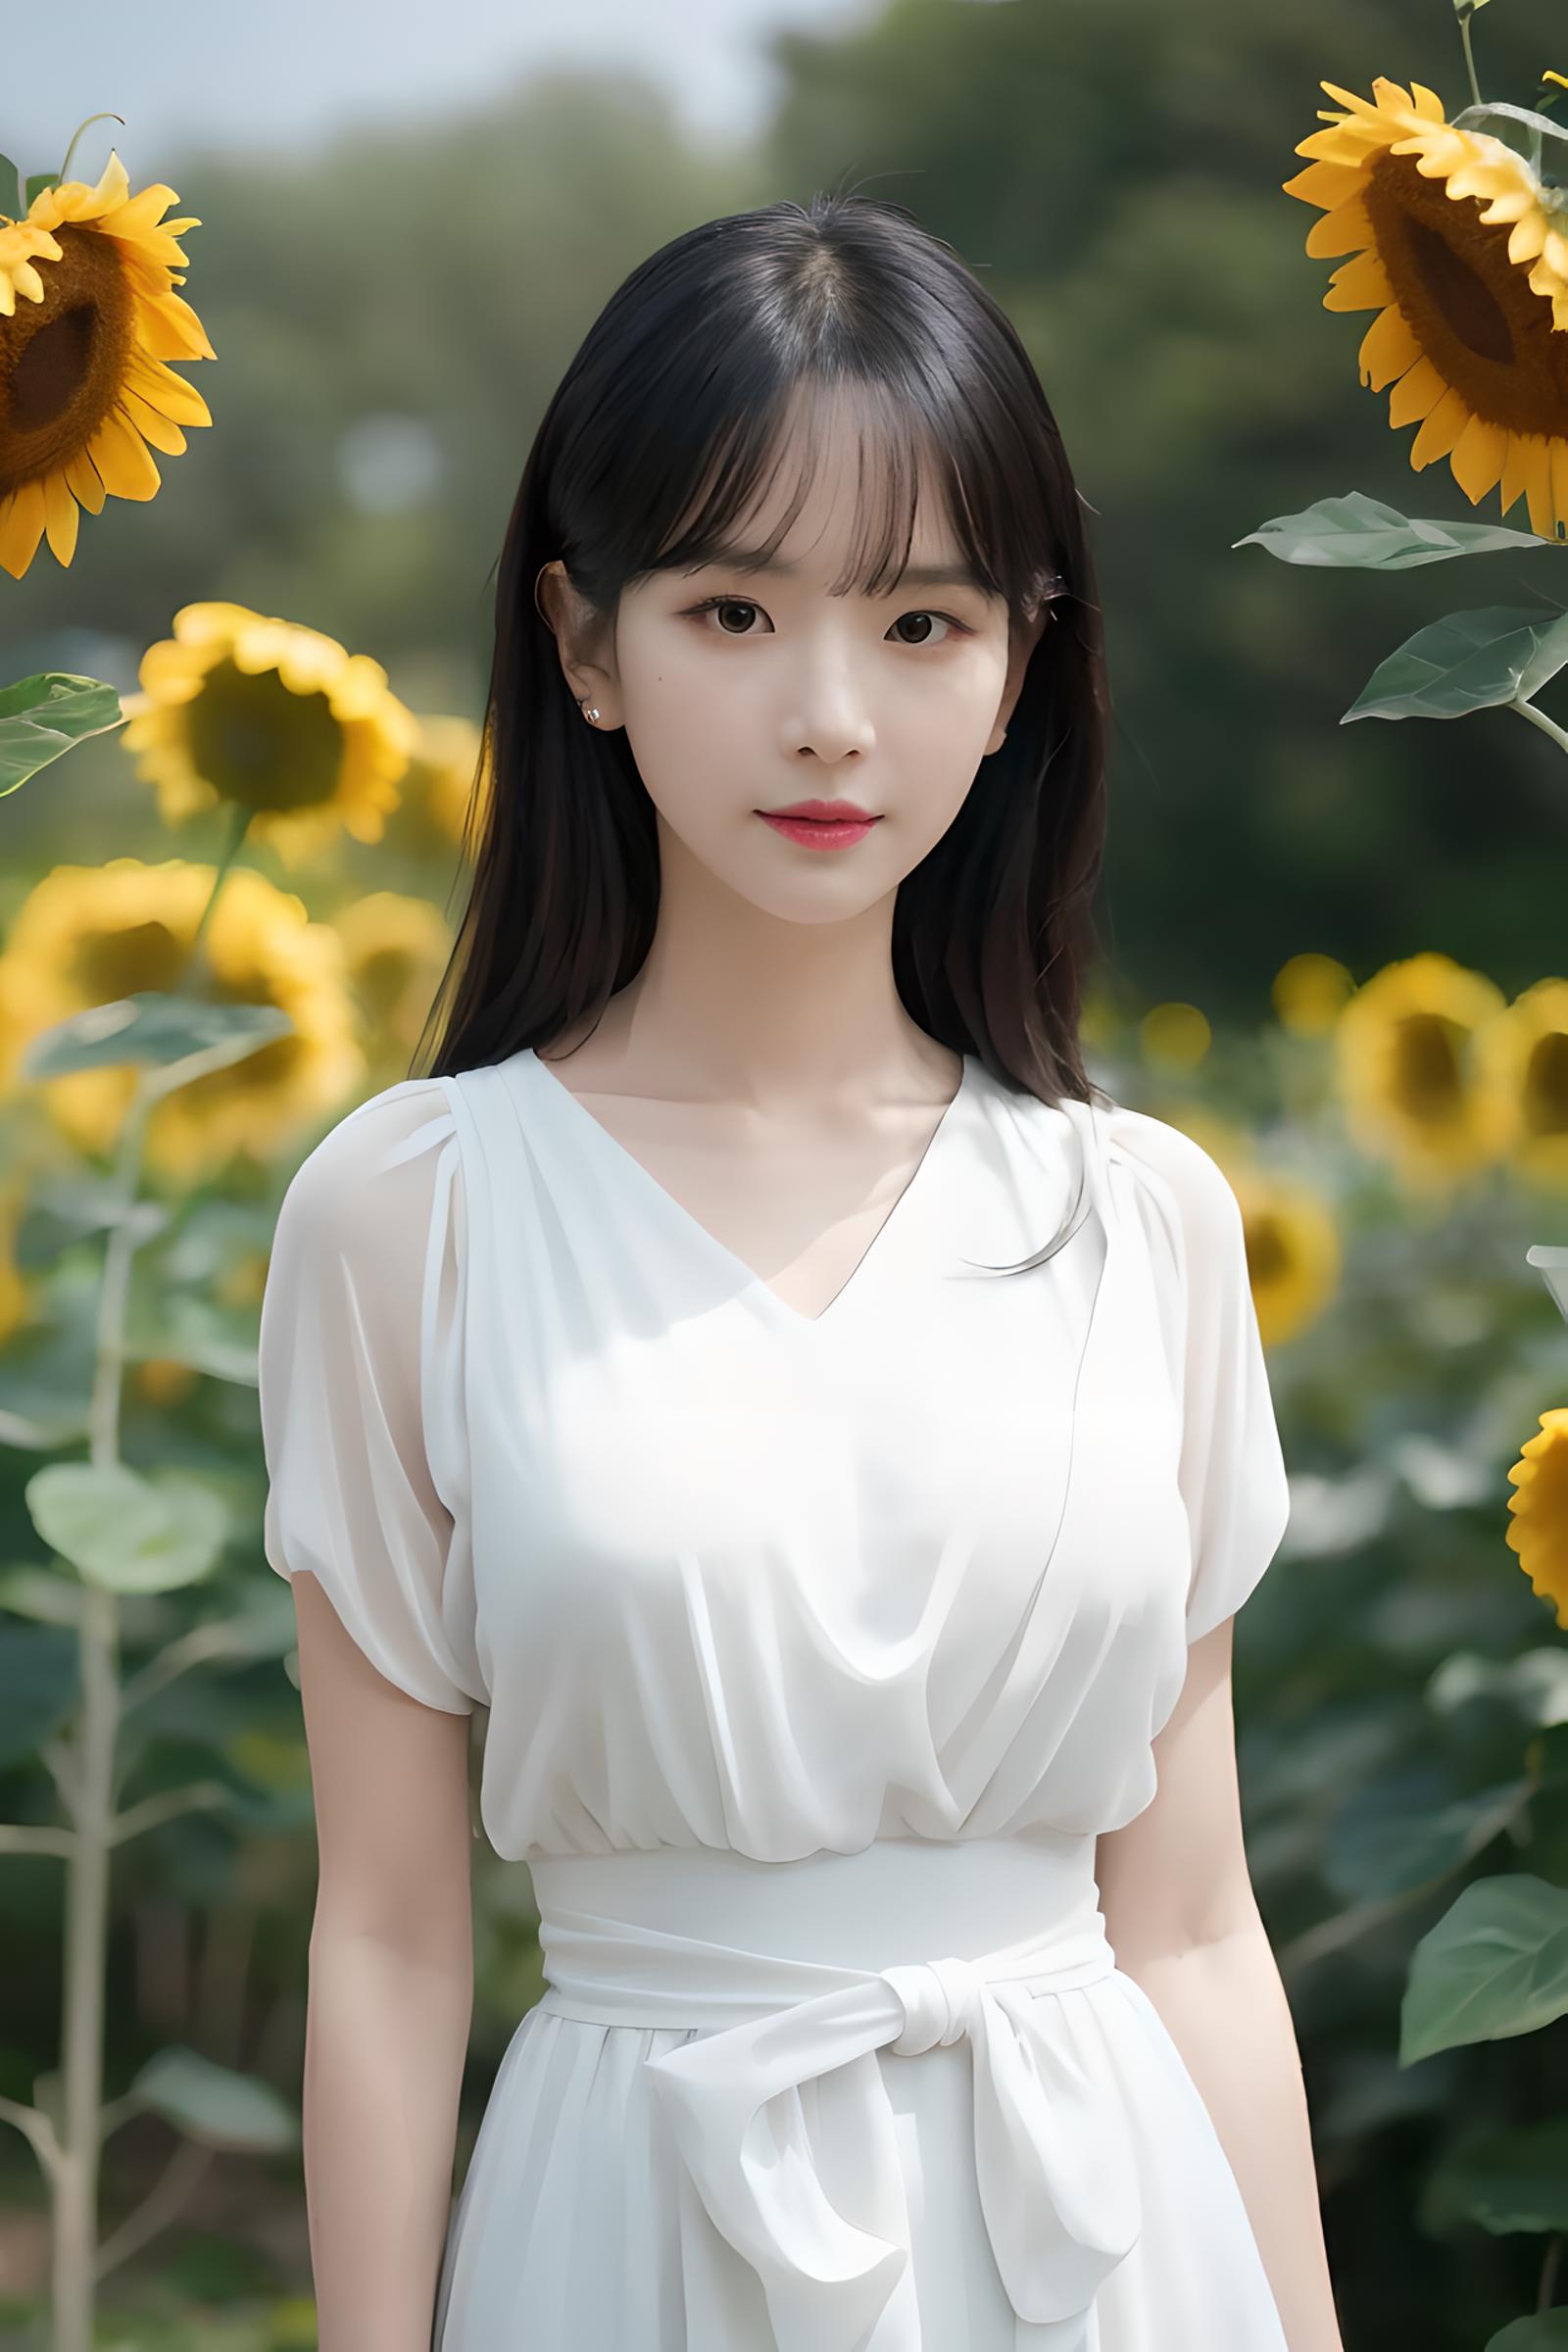 Not WJSN - Seola image by Tissue_AI